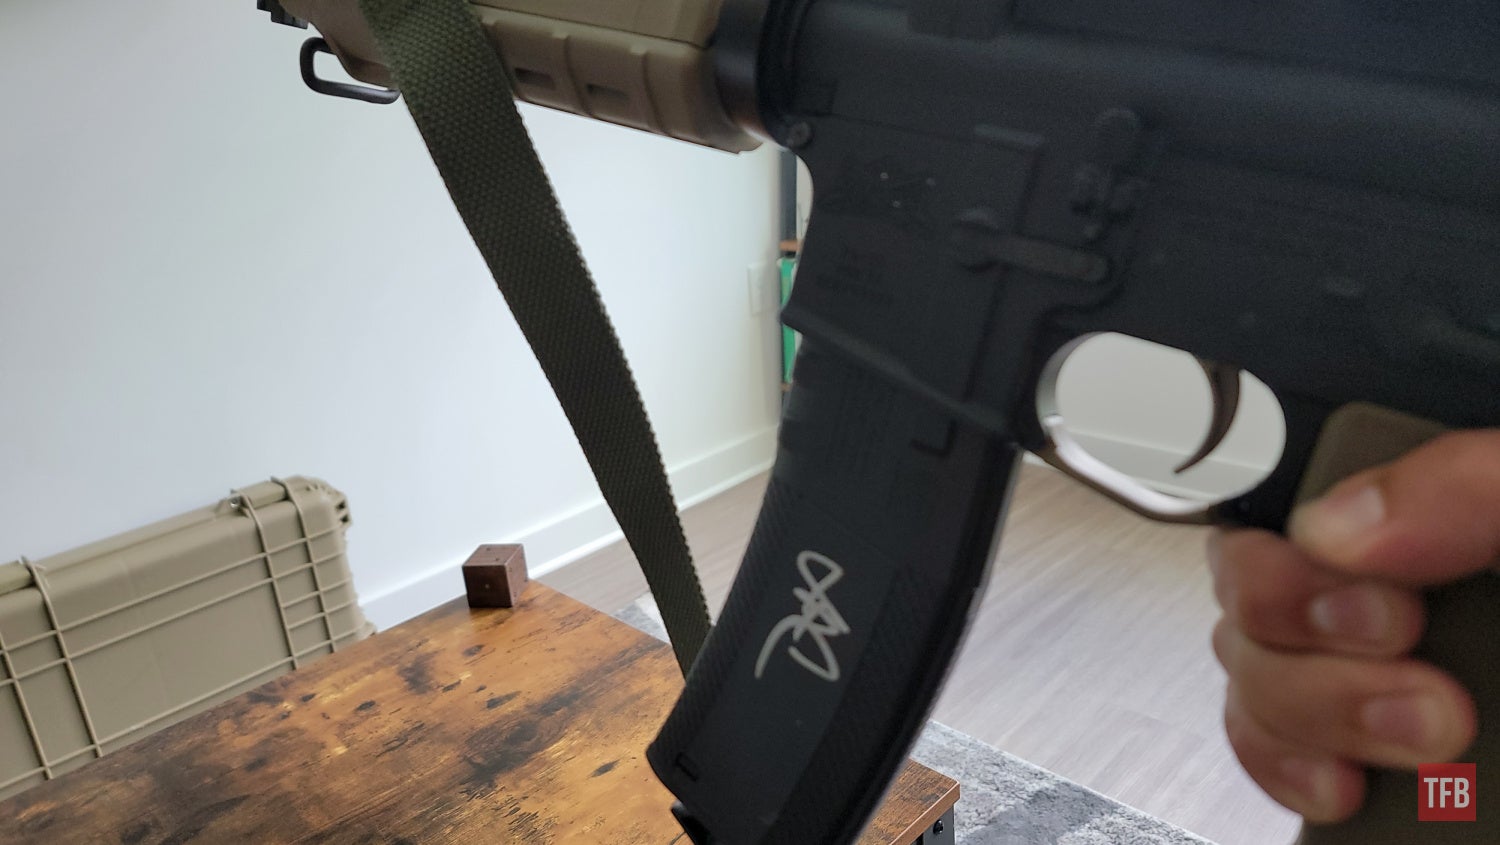 Are Aluminum Magazines Still the Best Option for the AR-15 Platform?